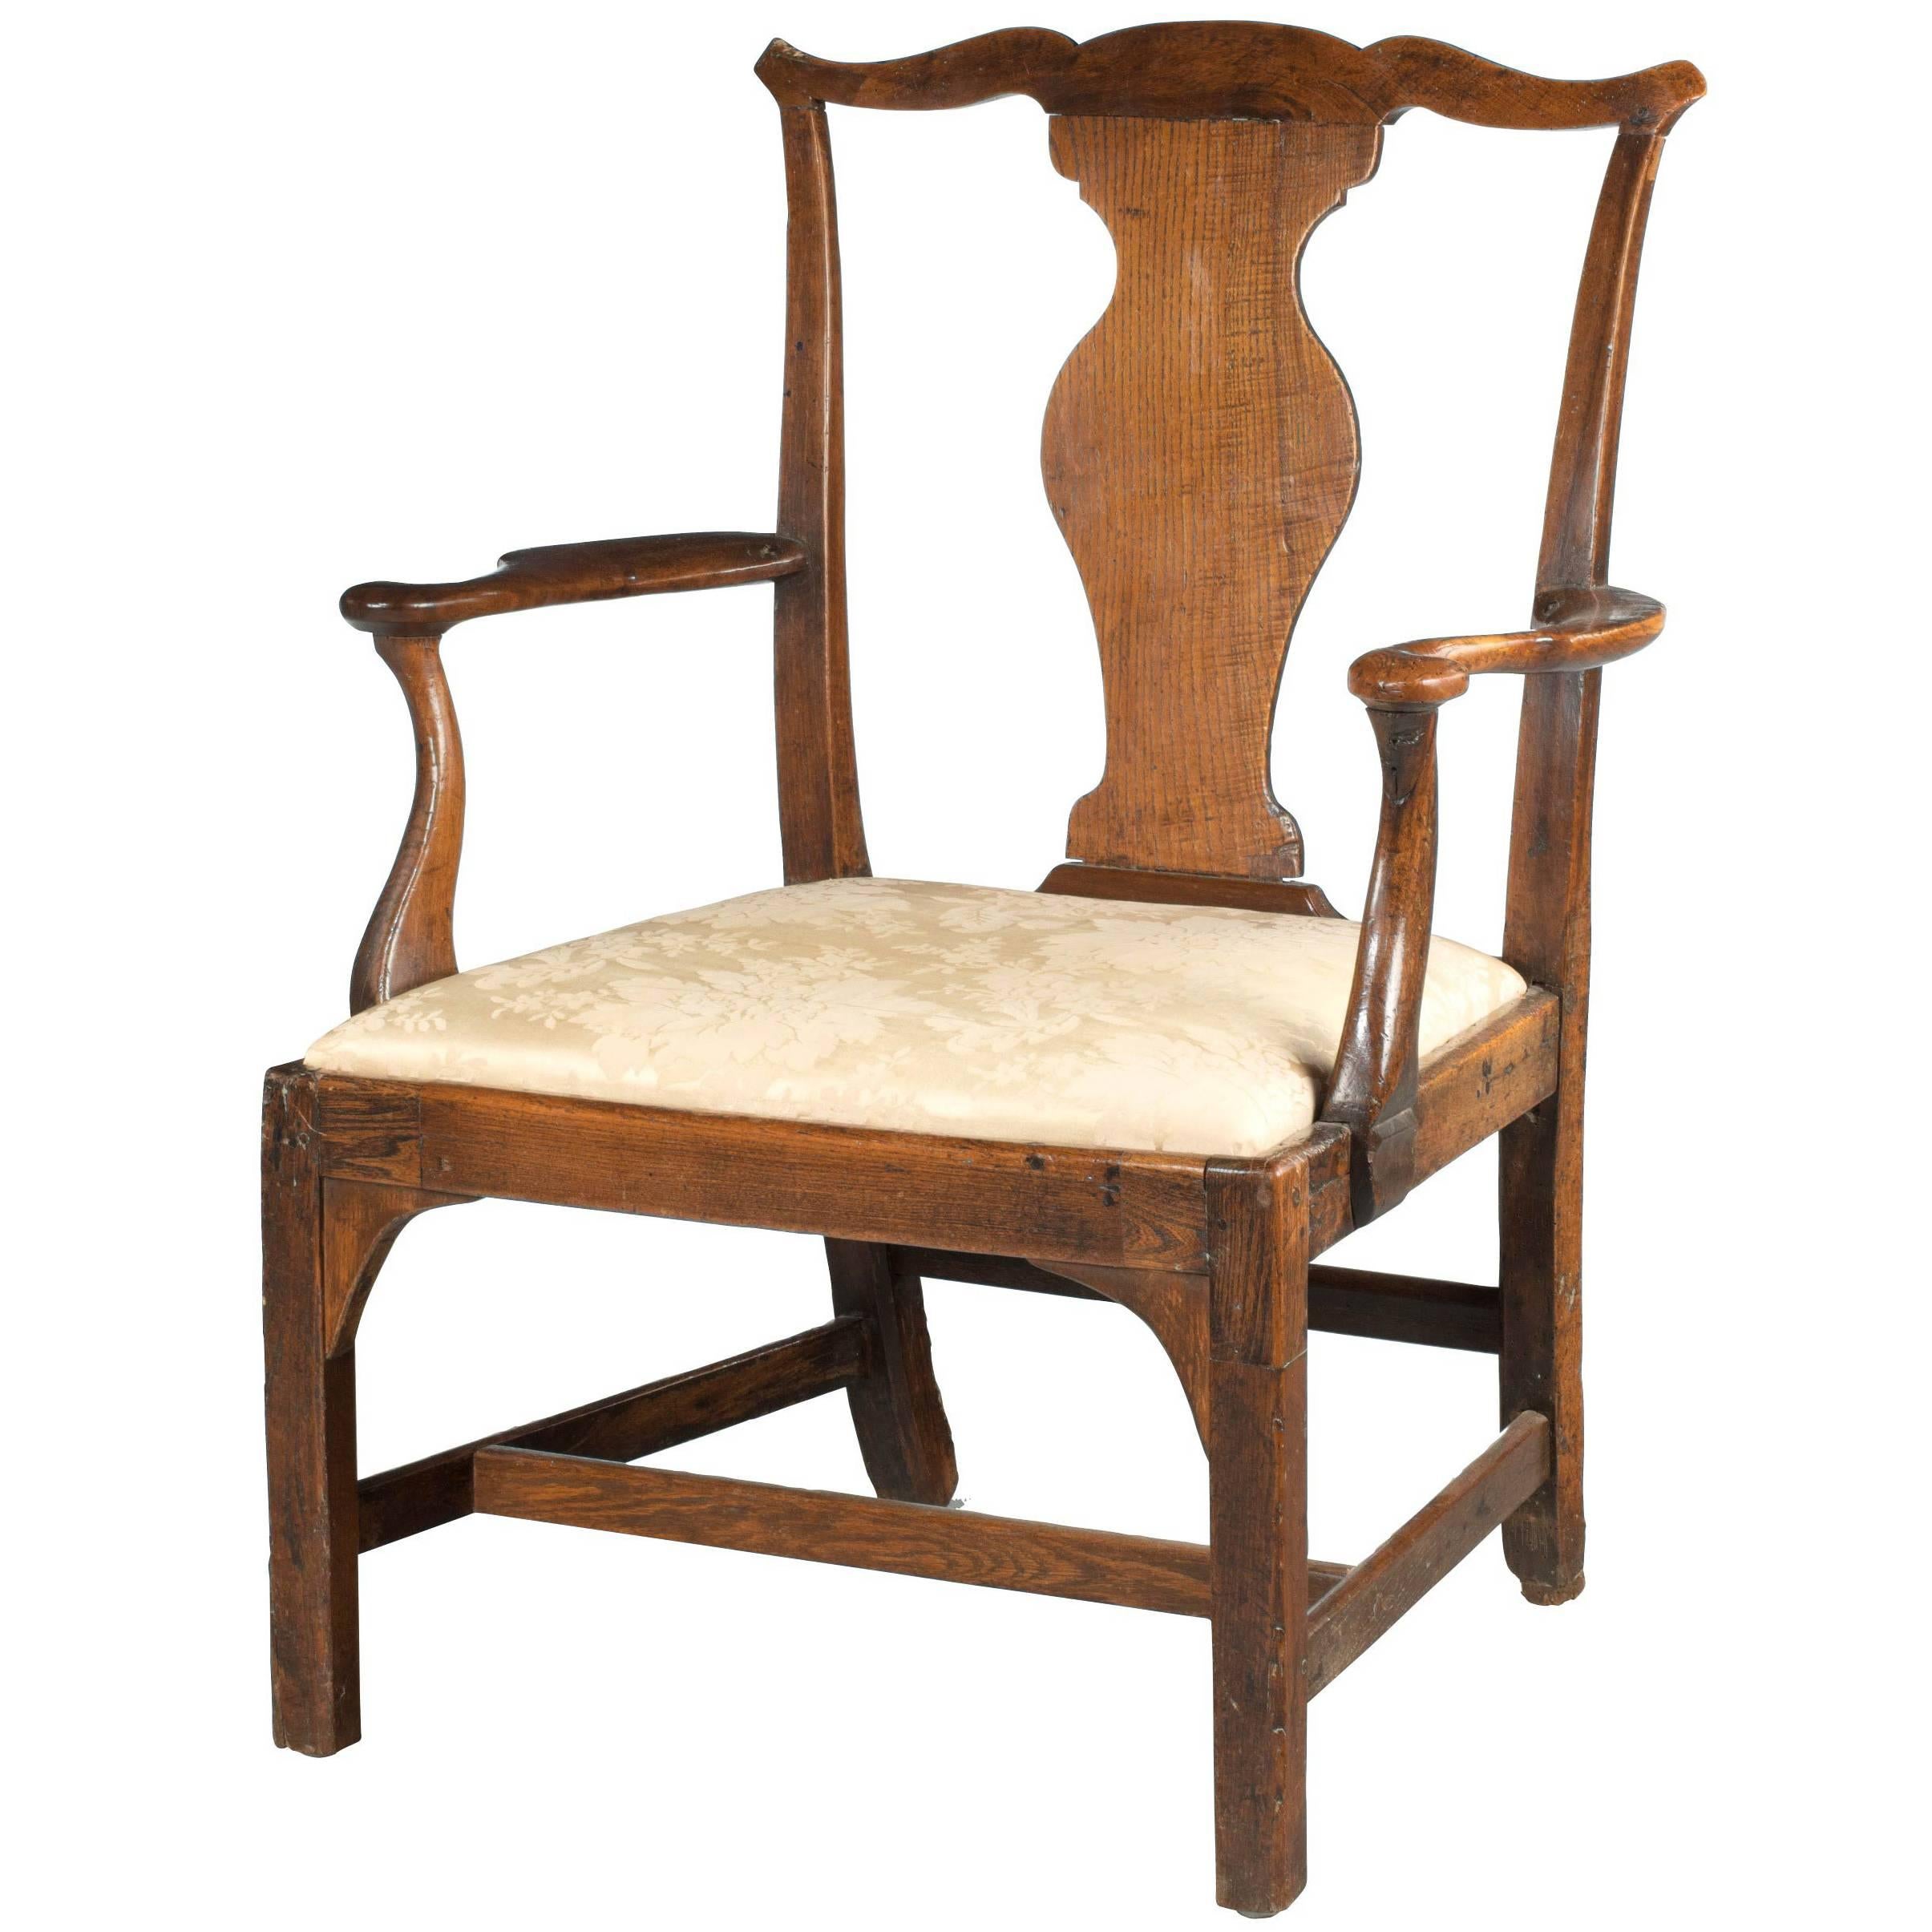 Mid-18th Century Elbow Chair of Very Substantial Proportions